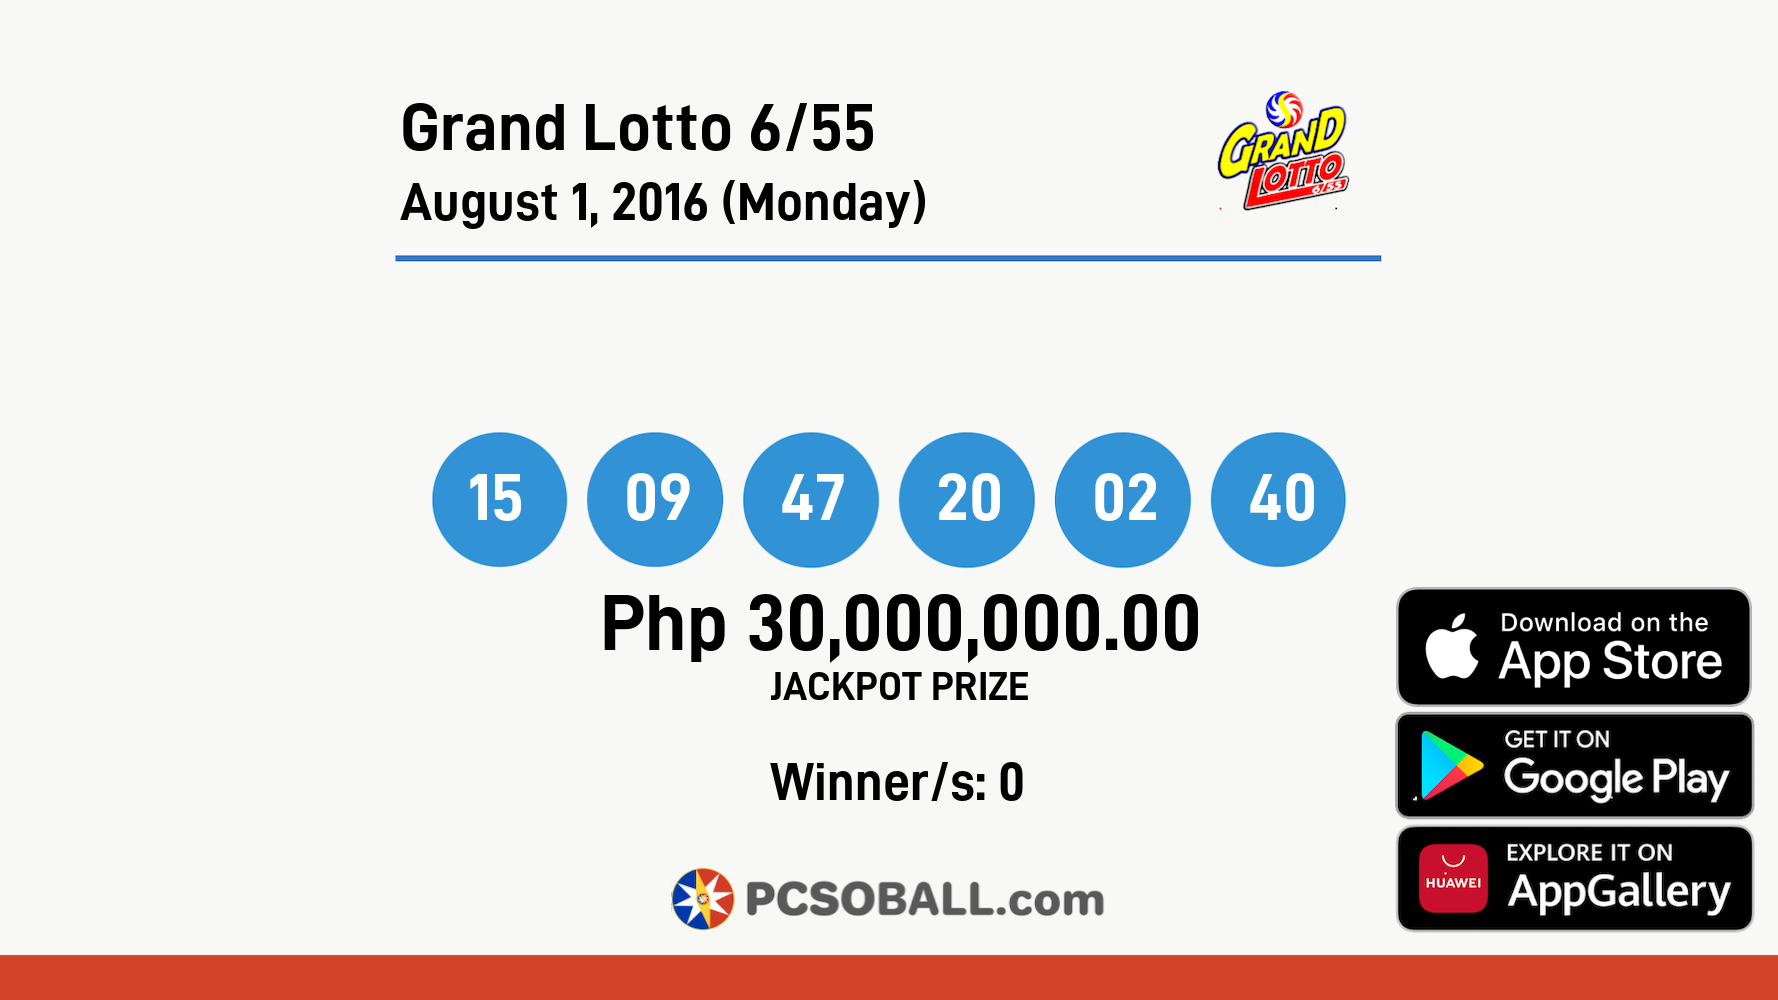 Grand Lotto 6/55 August 1, 2016 (Monday) Result